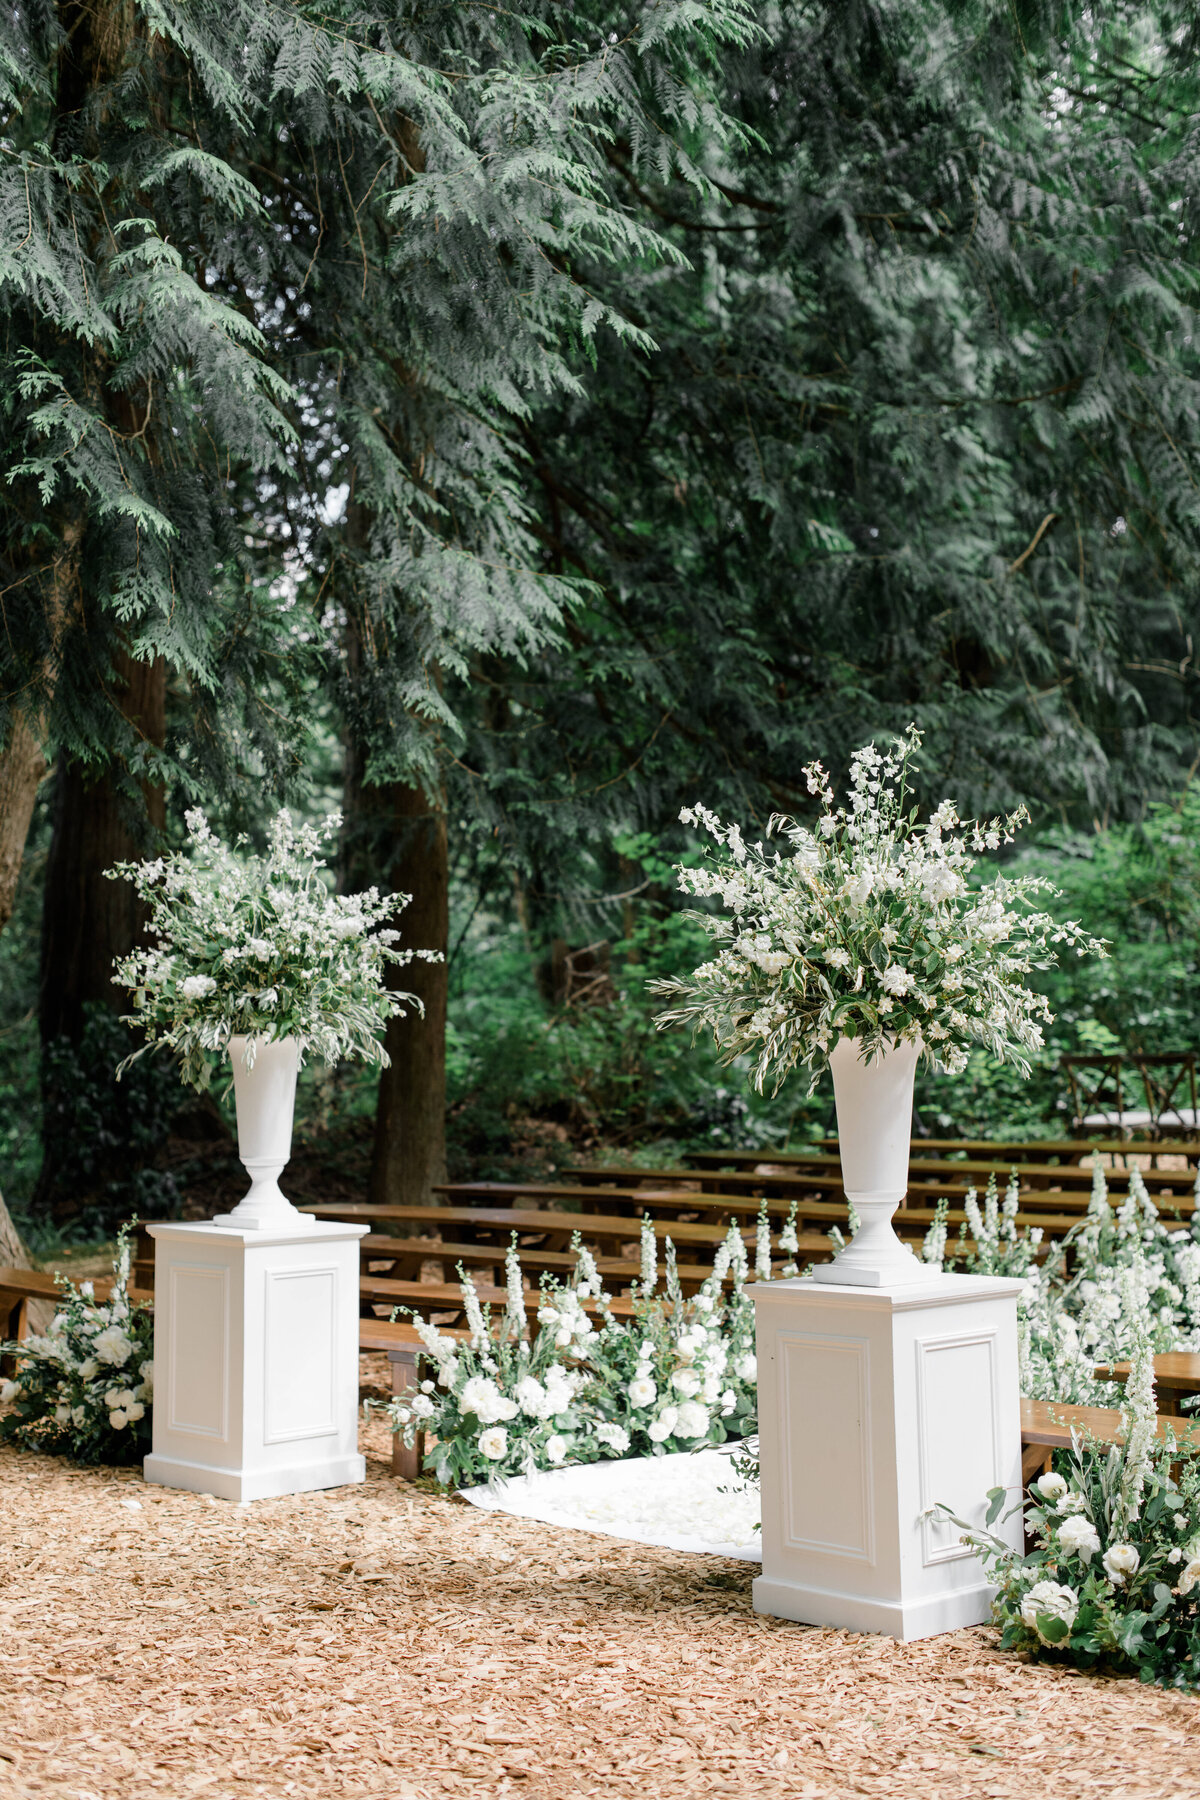 Stunning outdoor wedding ceremony set up with floral lined aisle